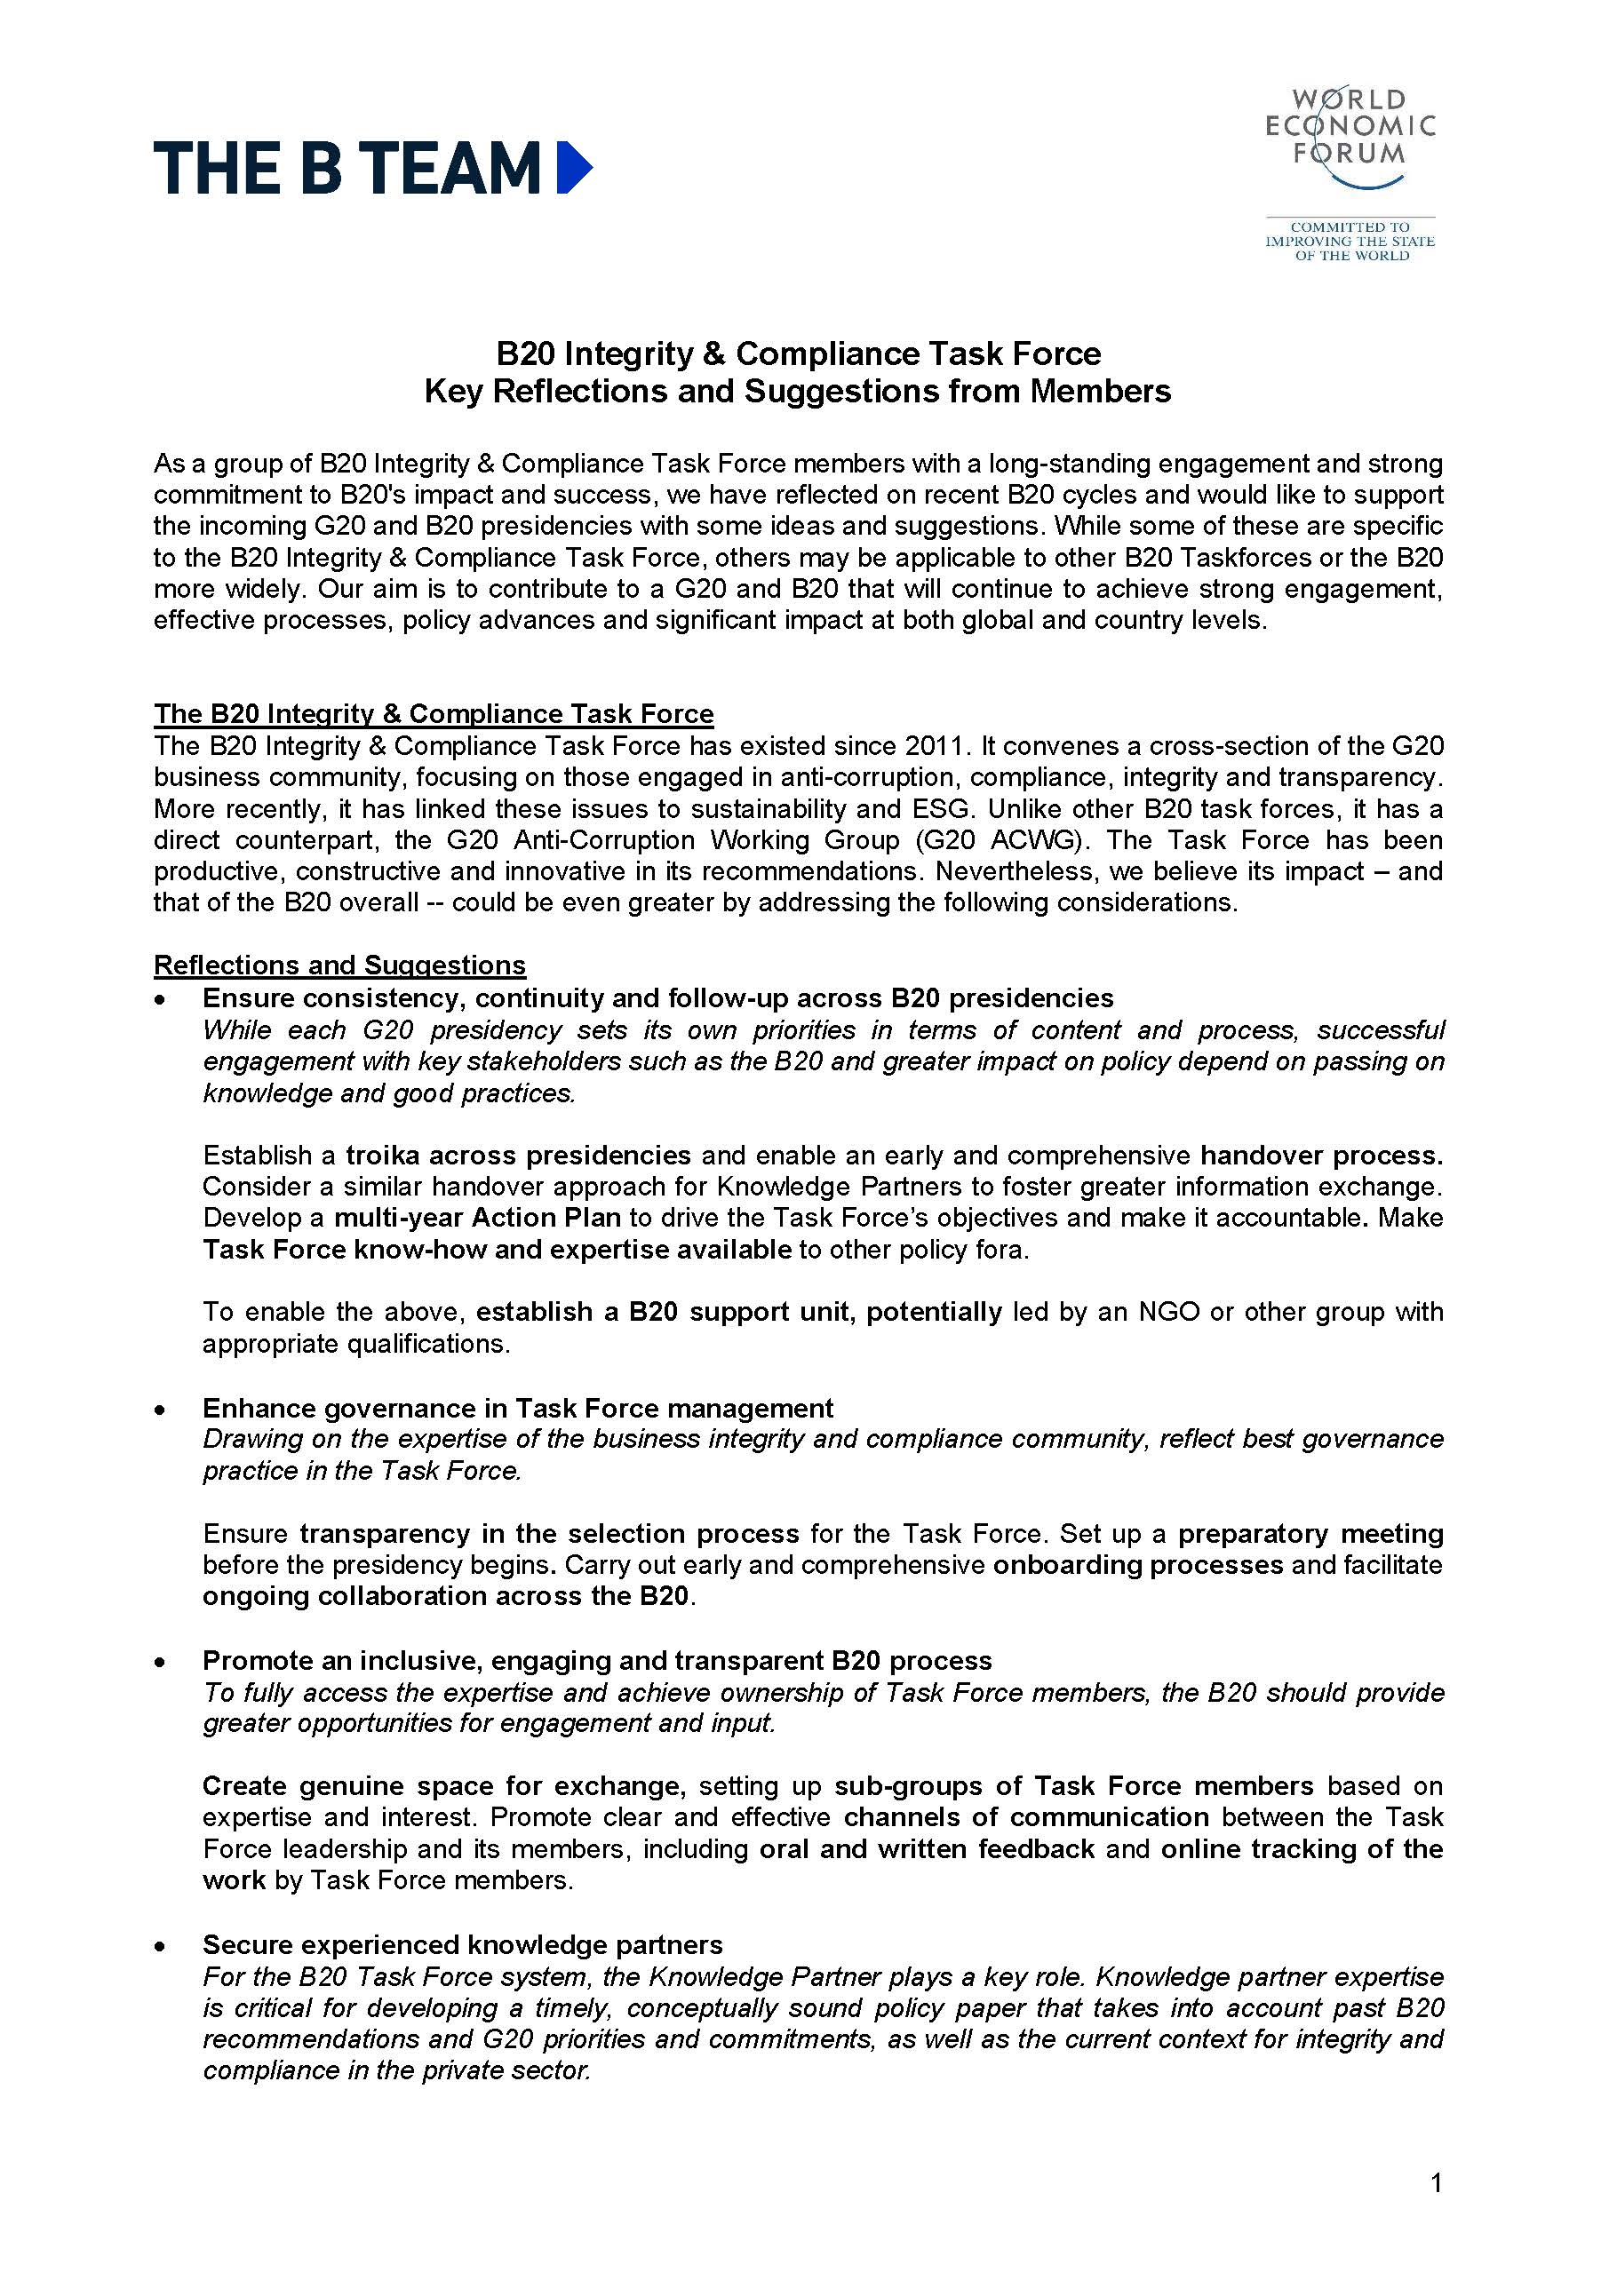 B20 Integrity and Compliance key suggestions - first page